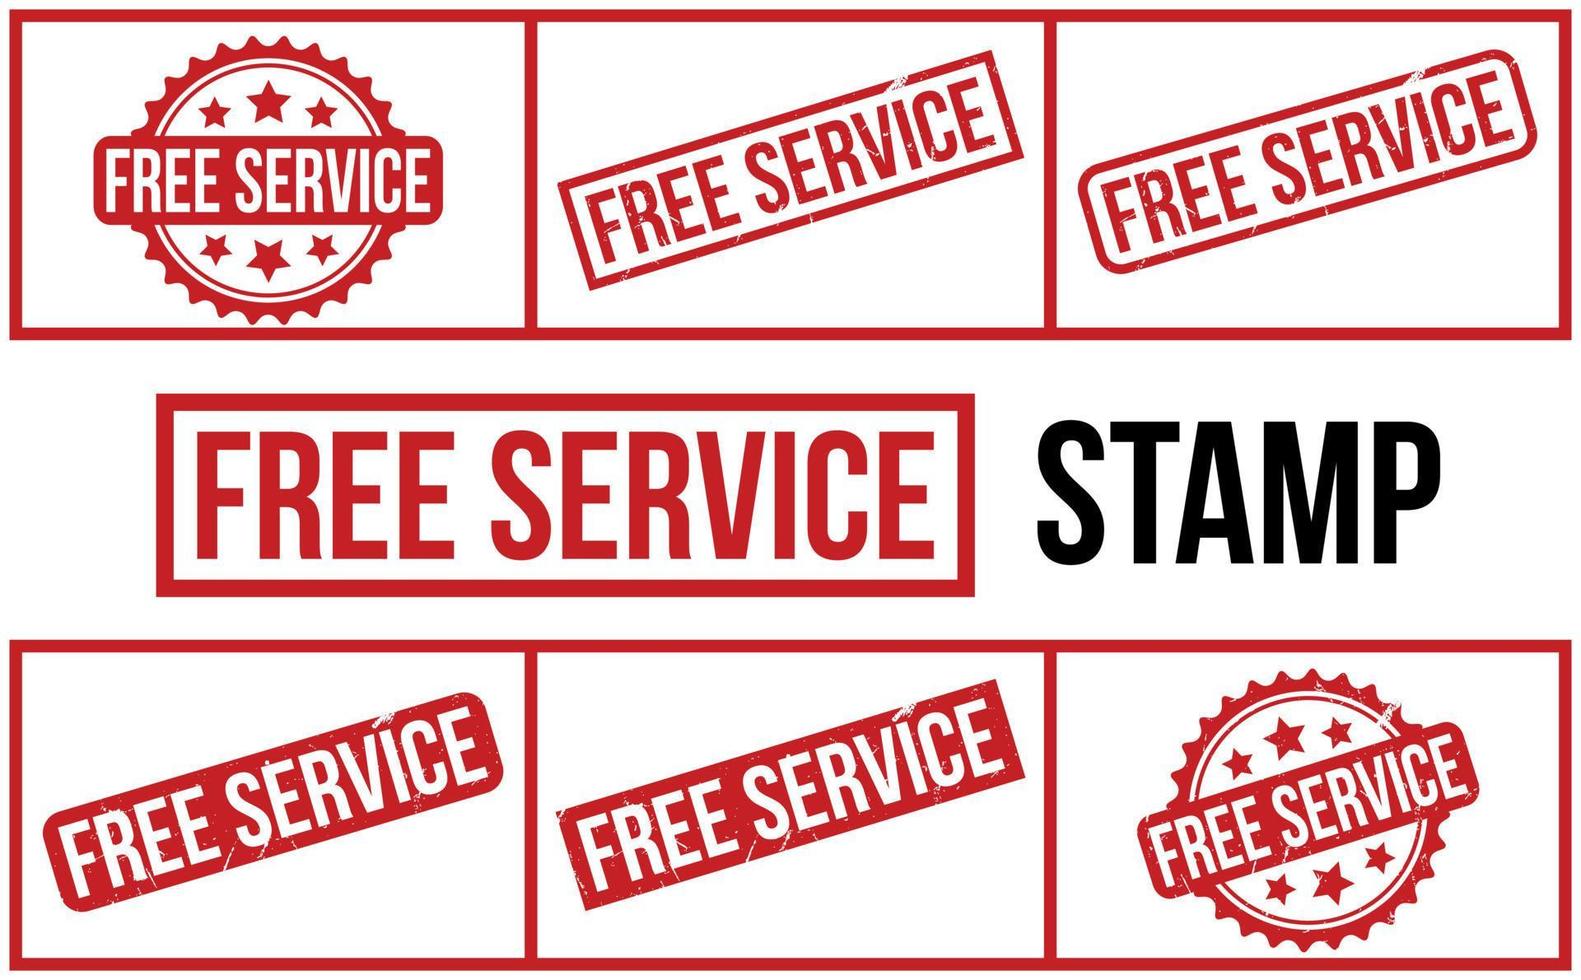 Free Service Rubber Stamp set Vector